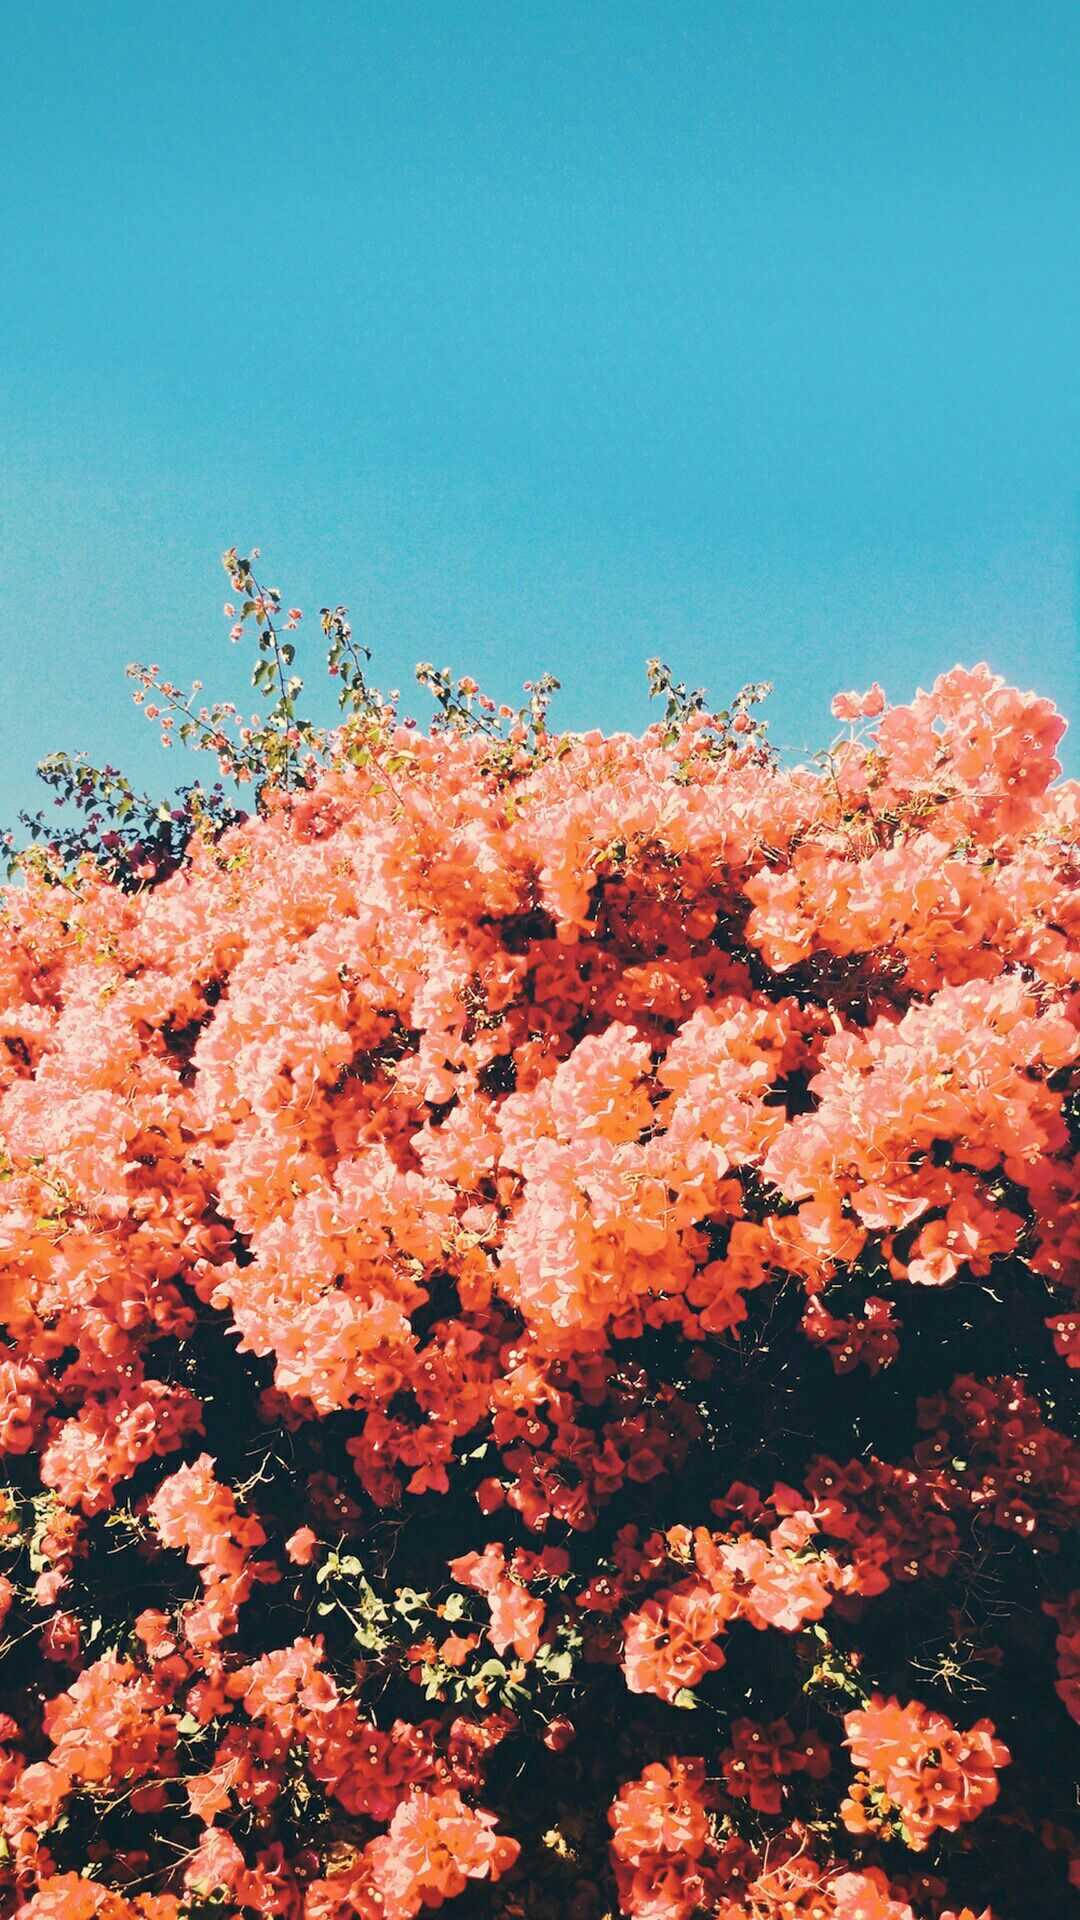 [200+] Spring Aesthetic Wallpapers | Wallpapers.com